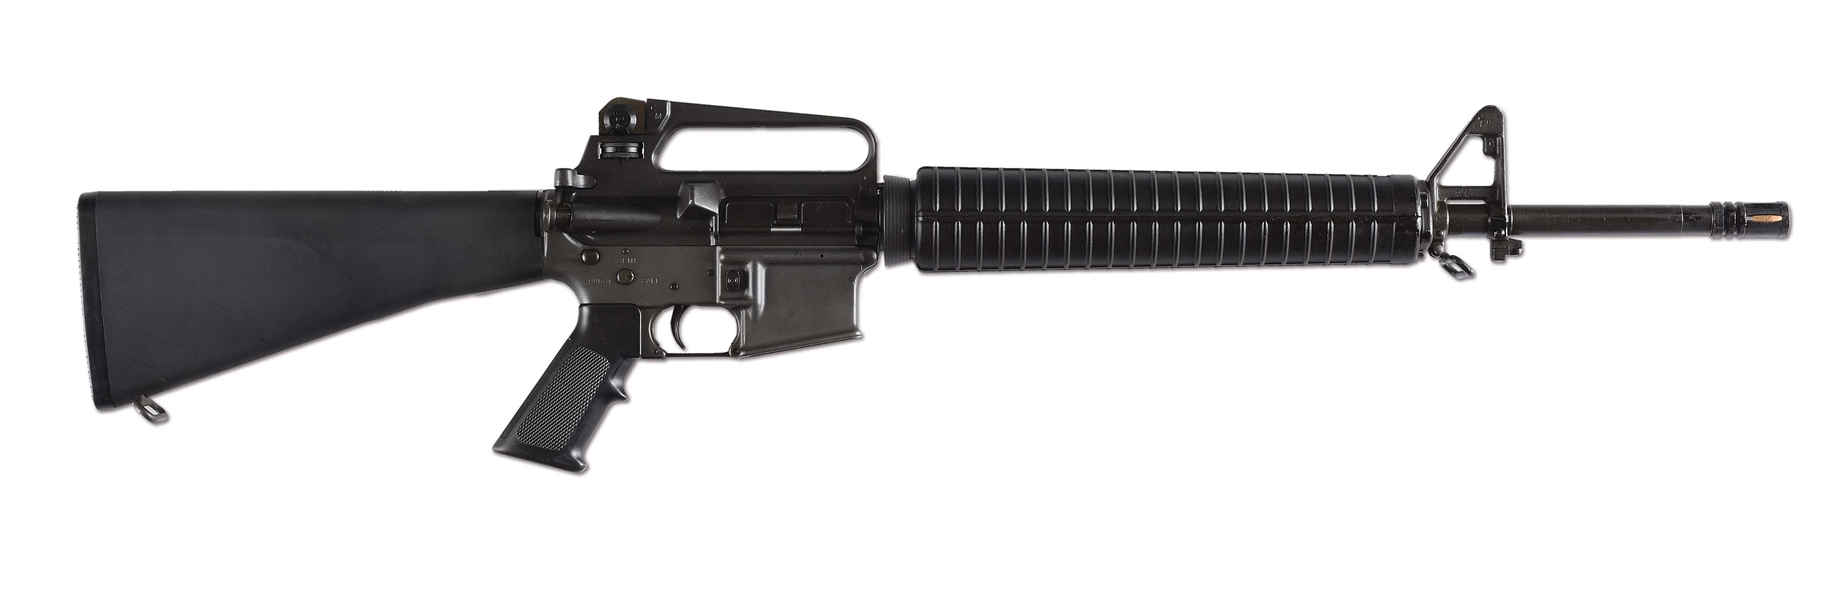 (N) EXCEPTIONAL “PROPERTY OF U.S. GOVT.” MARKED NEW IN BOX ORIGINAL COLT M16A2 VARIANT OF THE M16 MACHINE GUN (FULLY TRANSFERABLE)